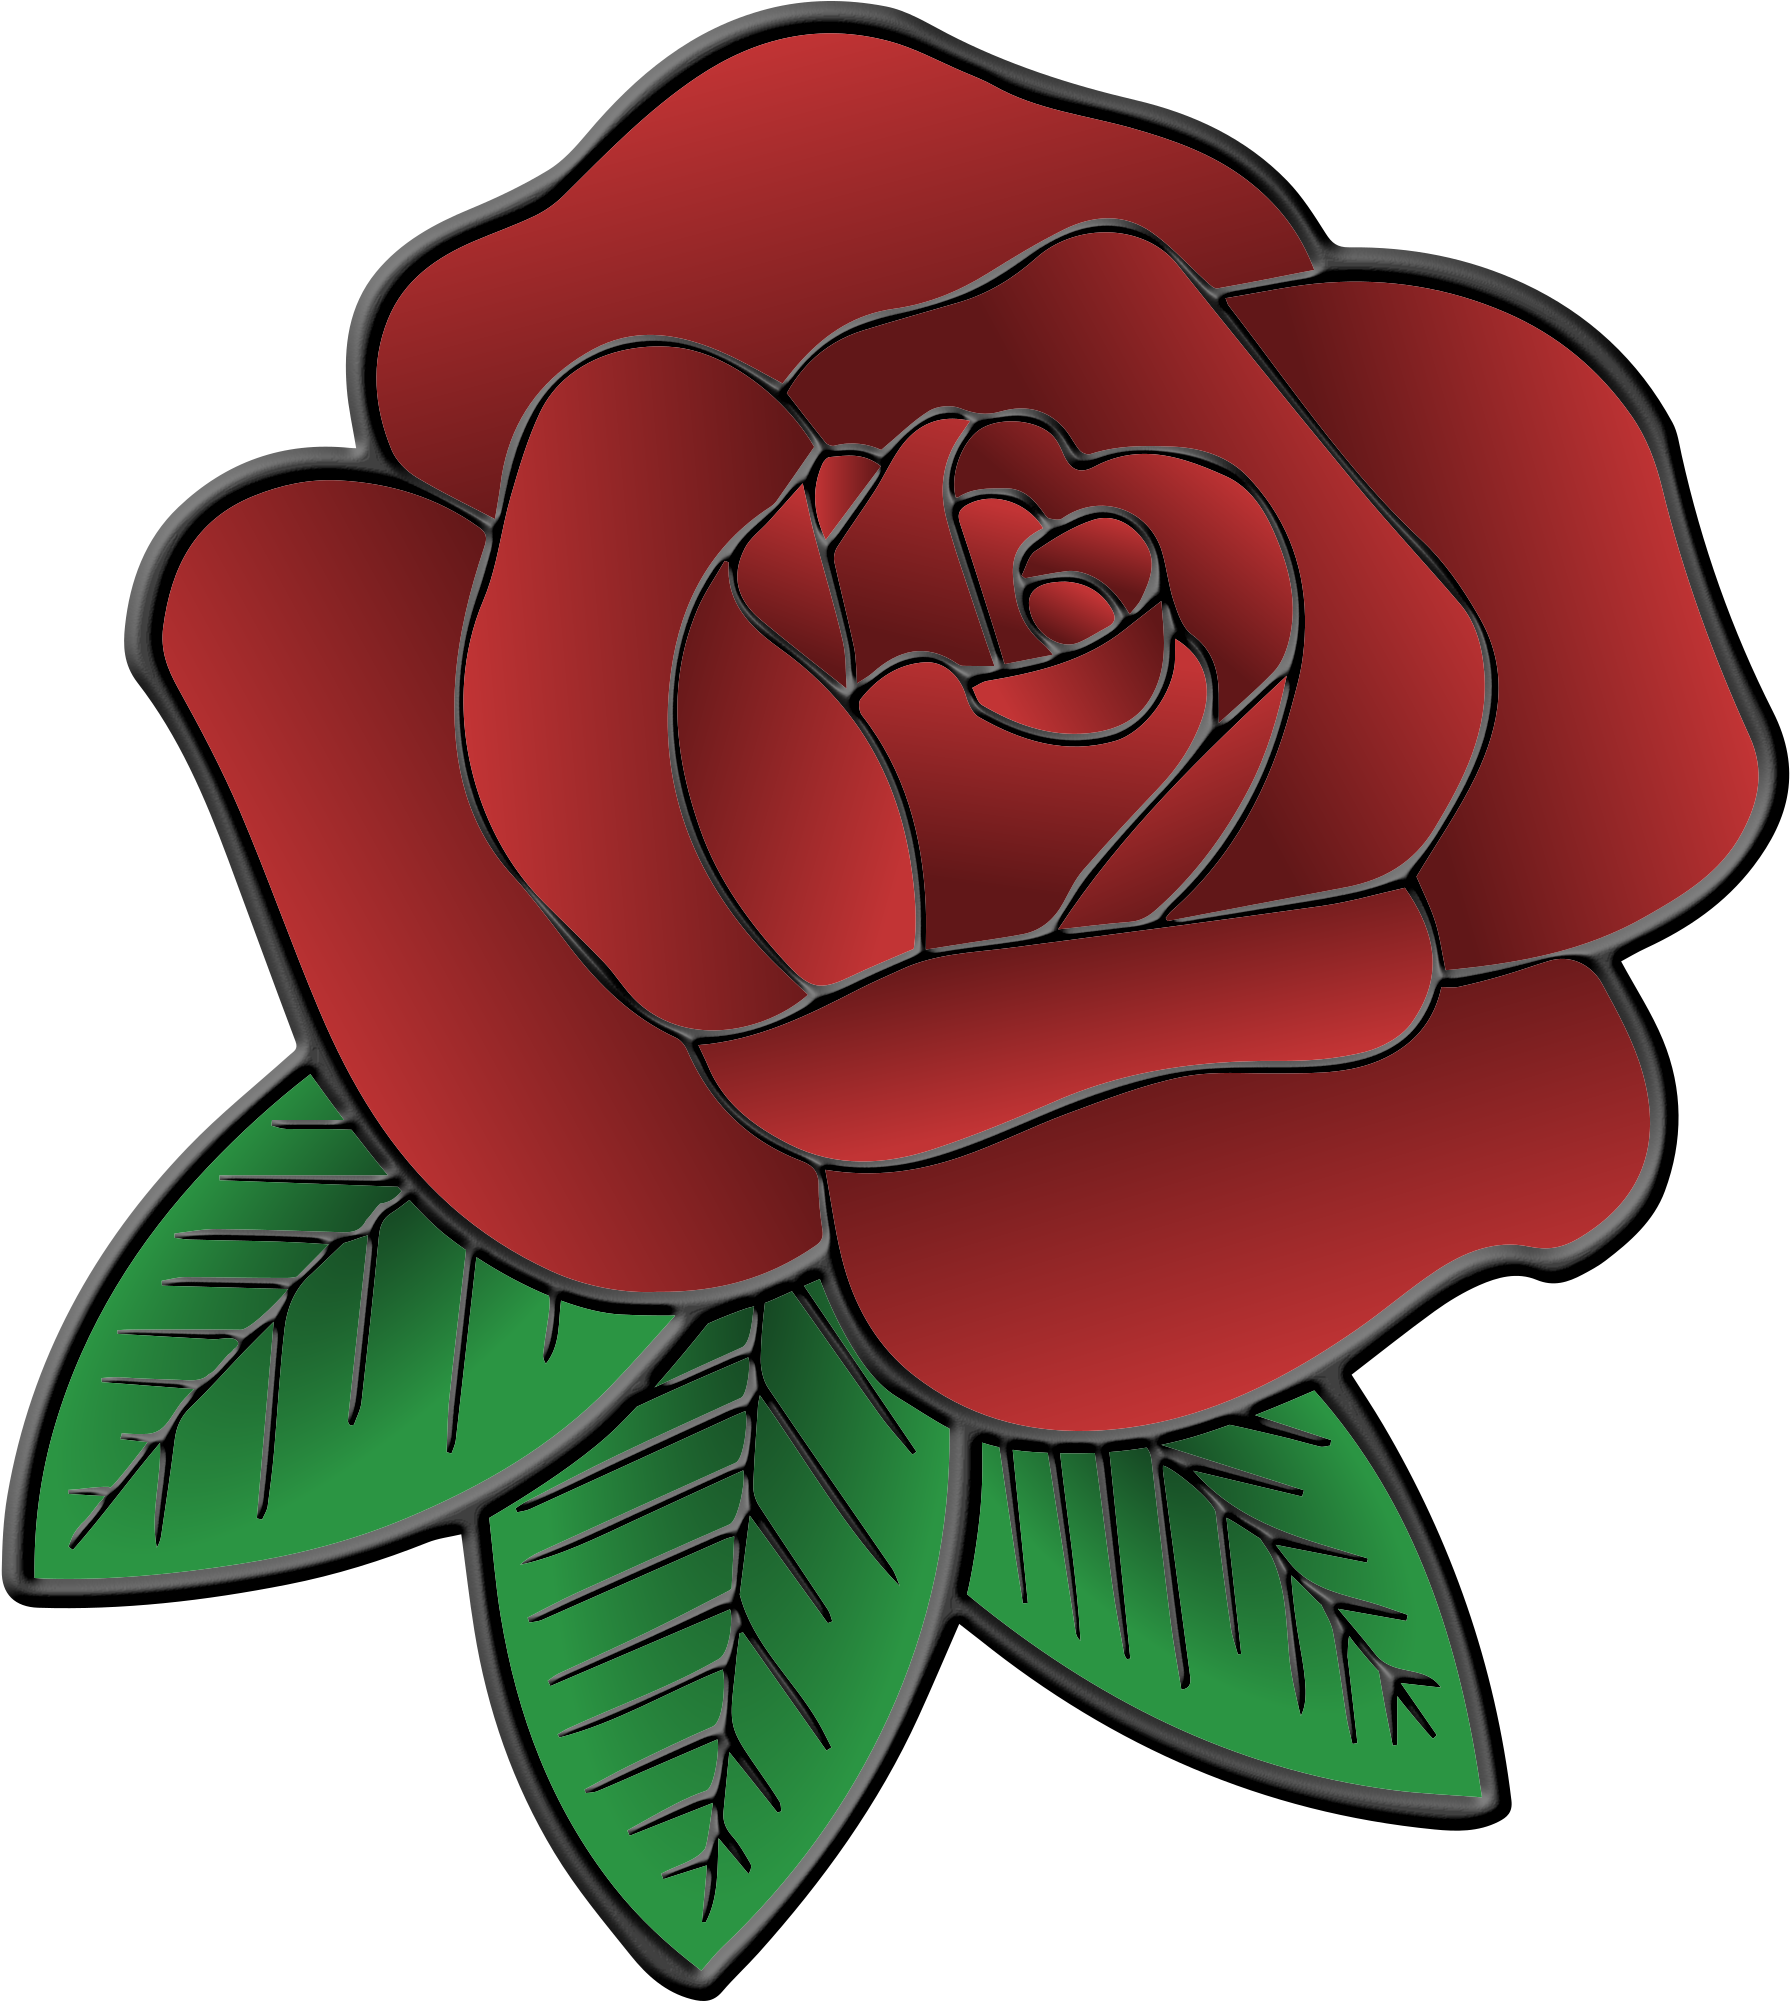 Big Image - Rose With Leaves Png (2145x2400)